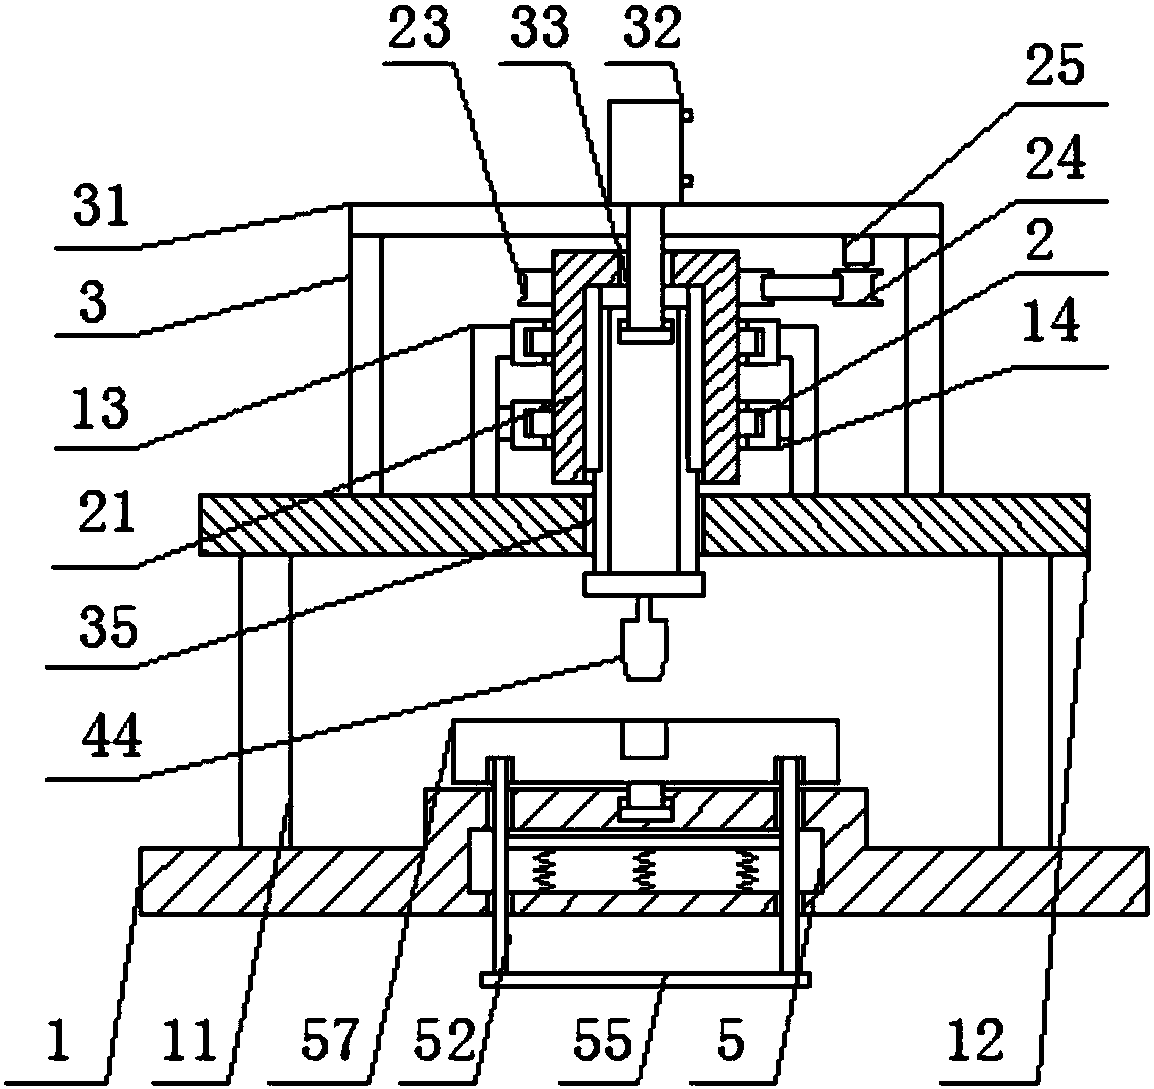 Sewing machine punching device for producing shoes